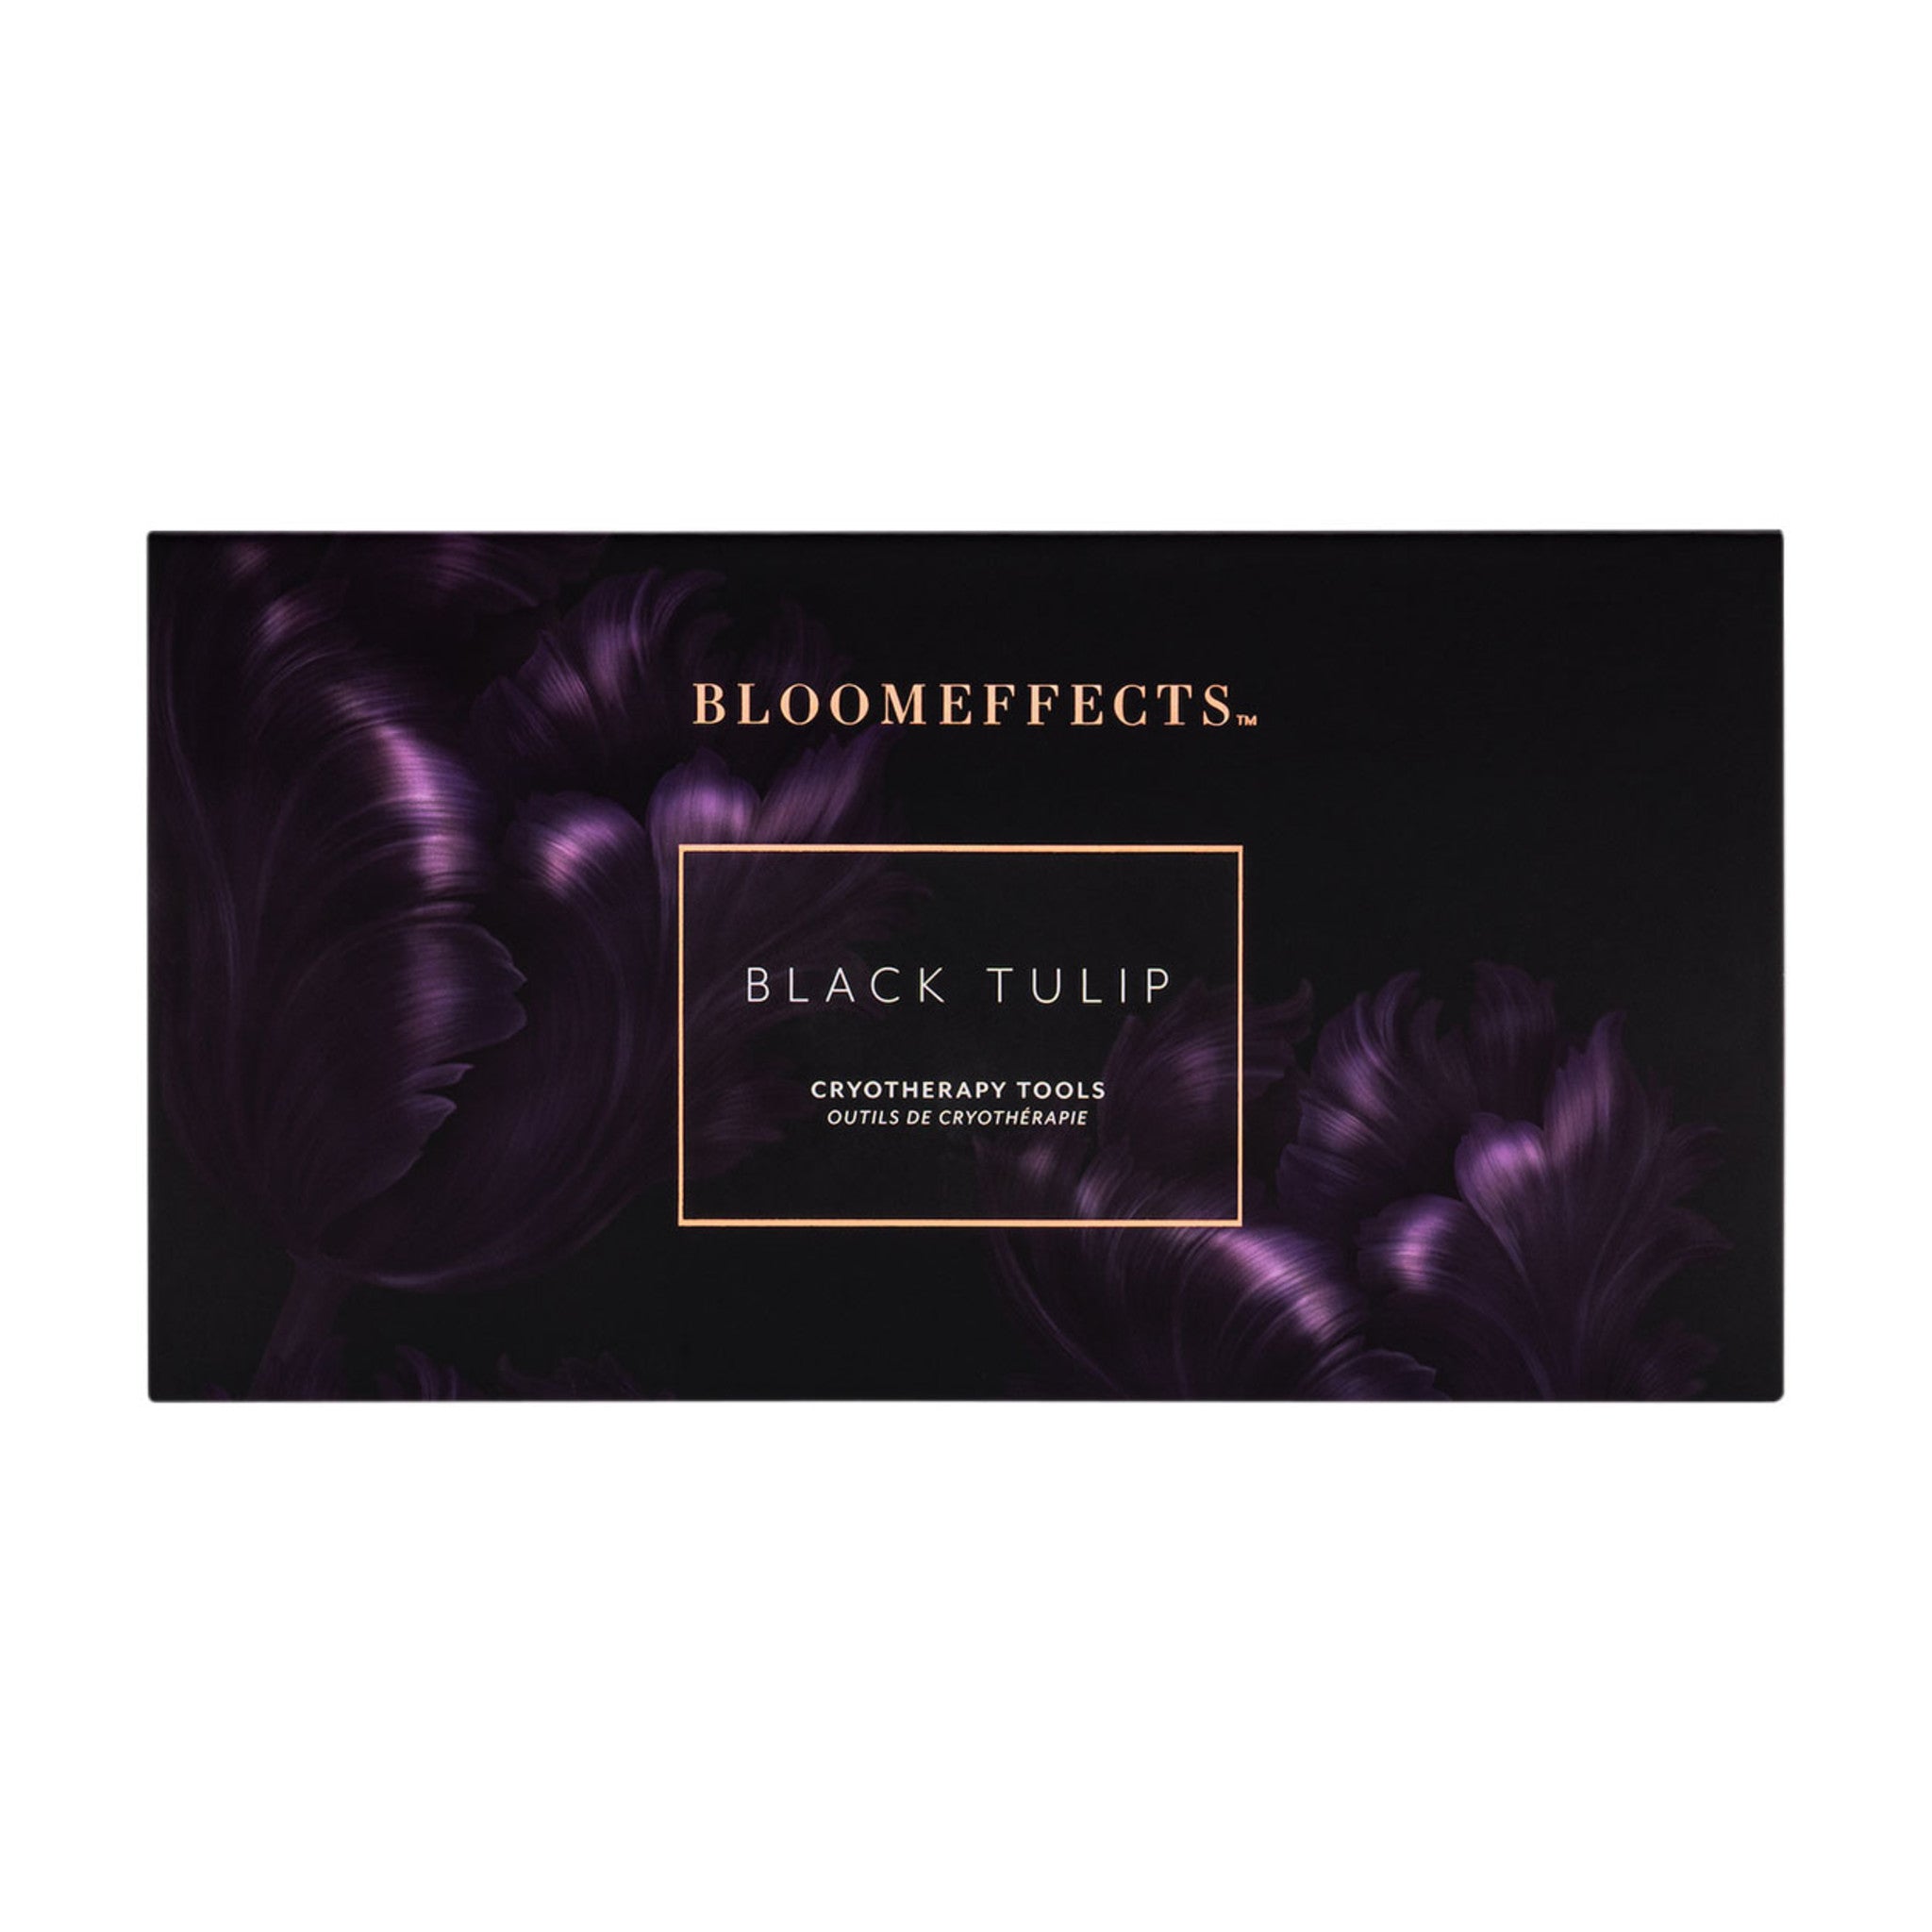 Bloomeffects Black Tulip Cryotherapy Tools main image.